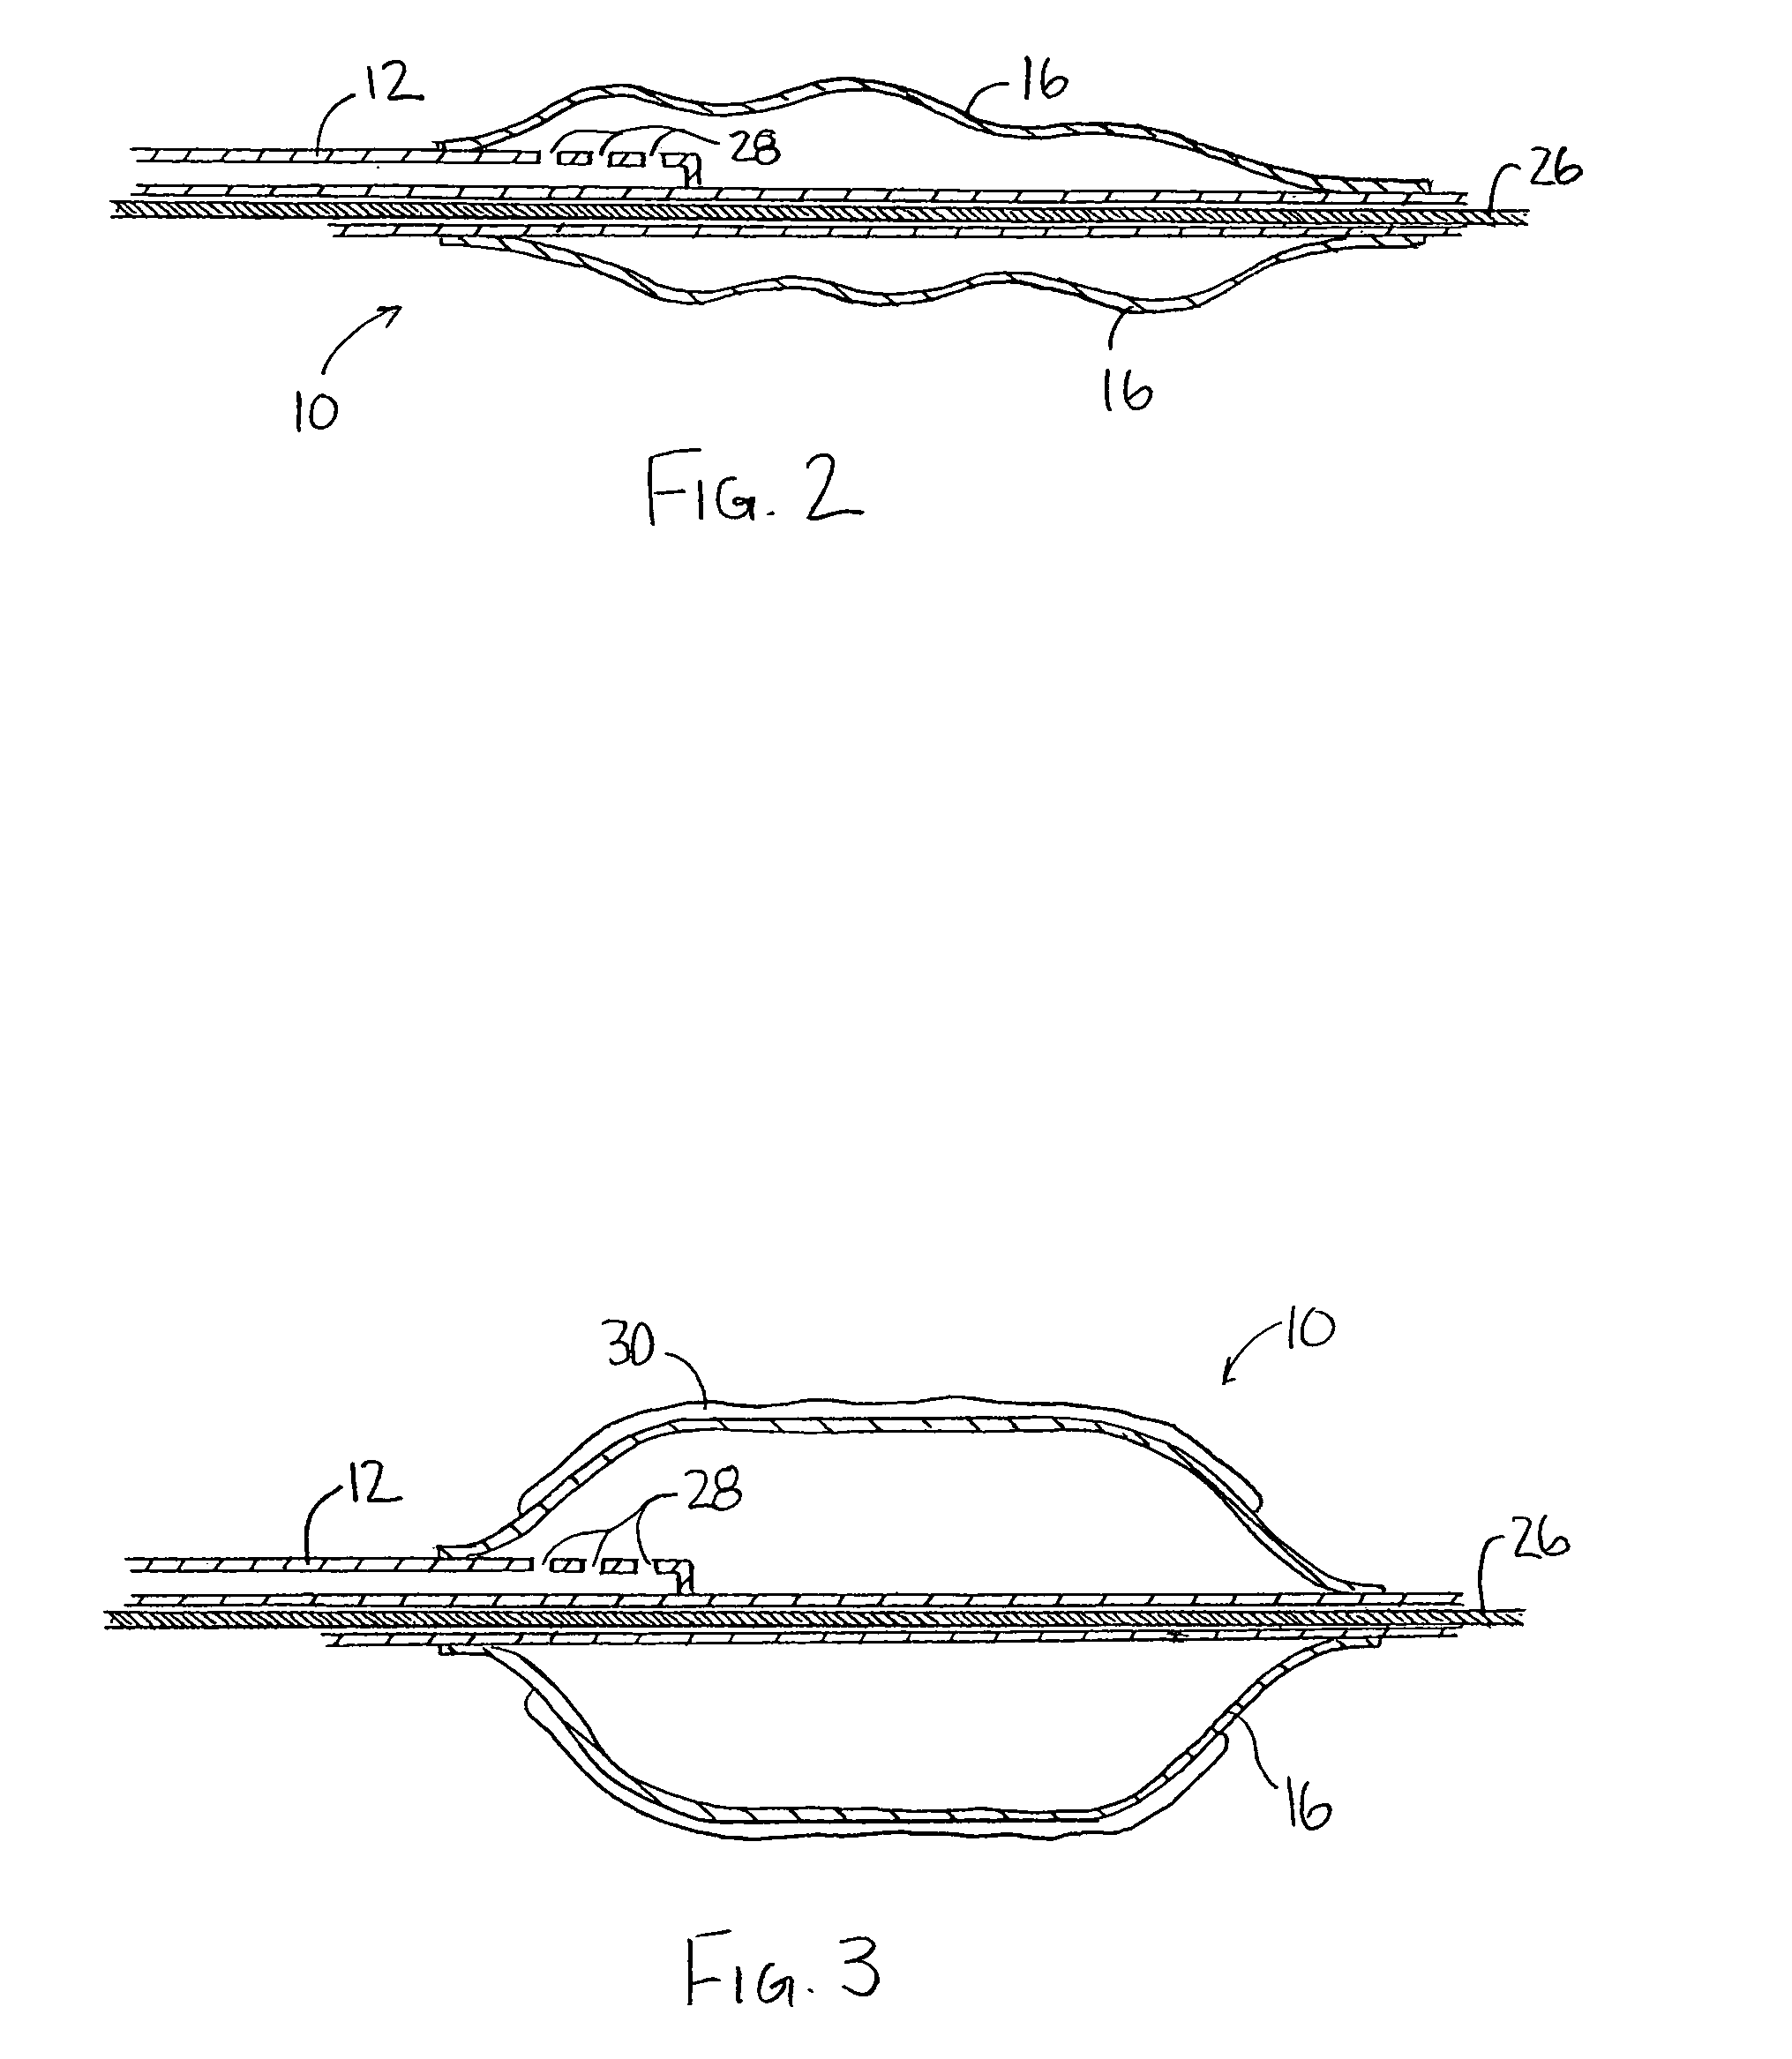 Application of a therapeutic substance to a tissue location using an expandable medical device